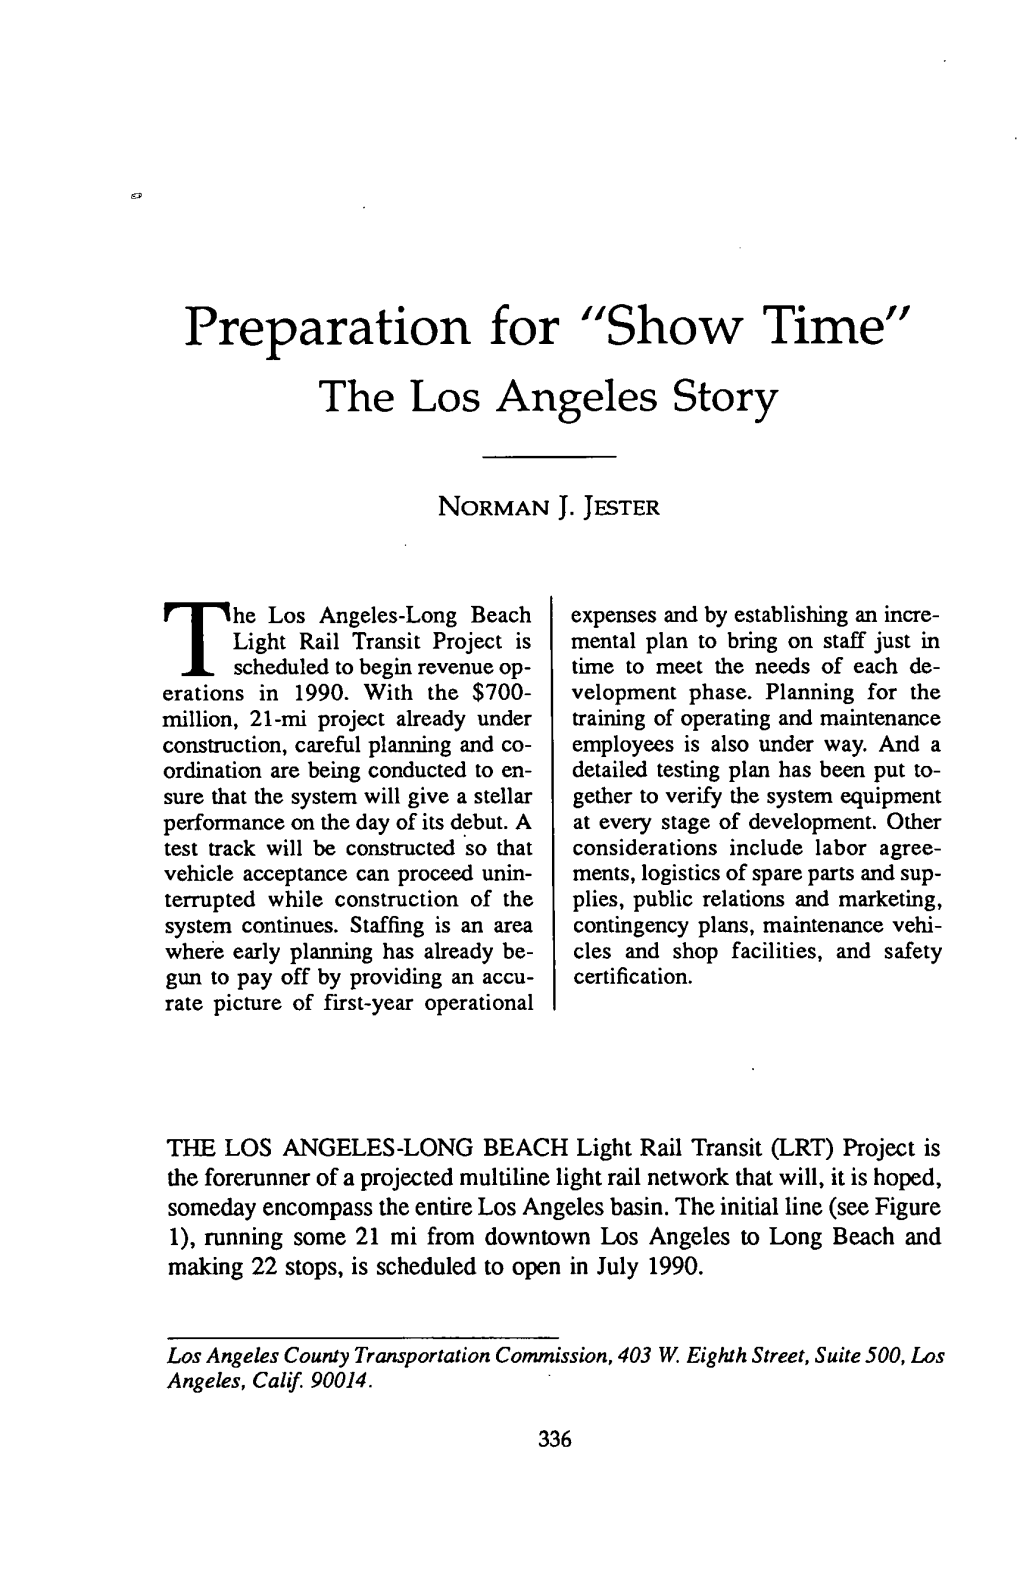 Preparation for "Show Time" the Los Angeles Story